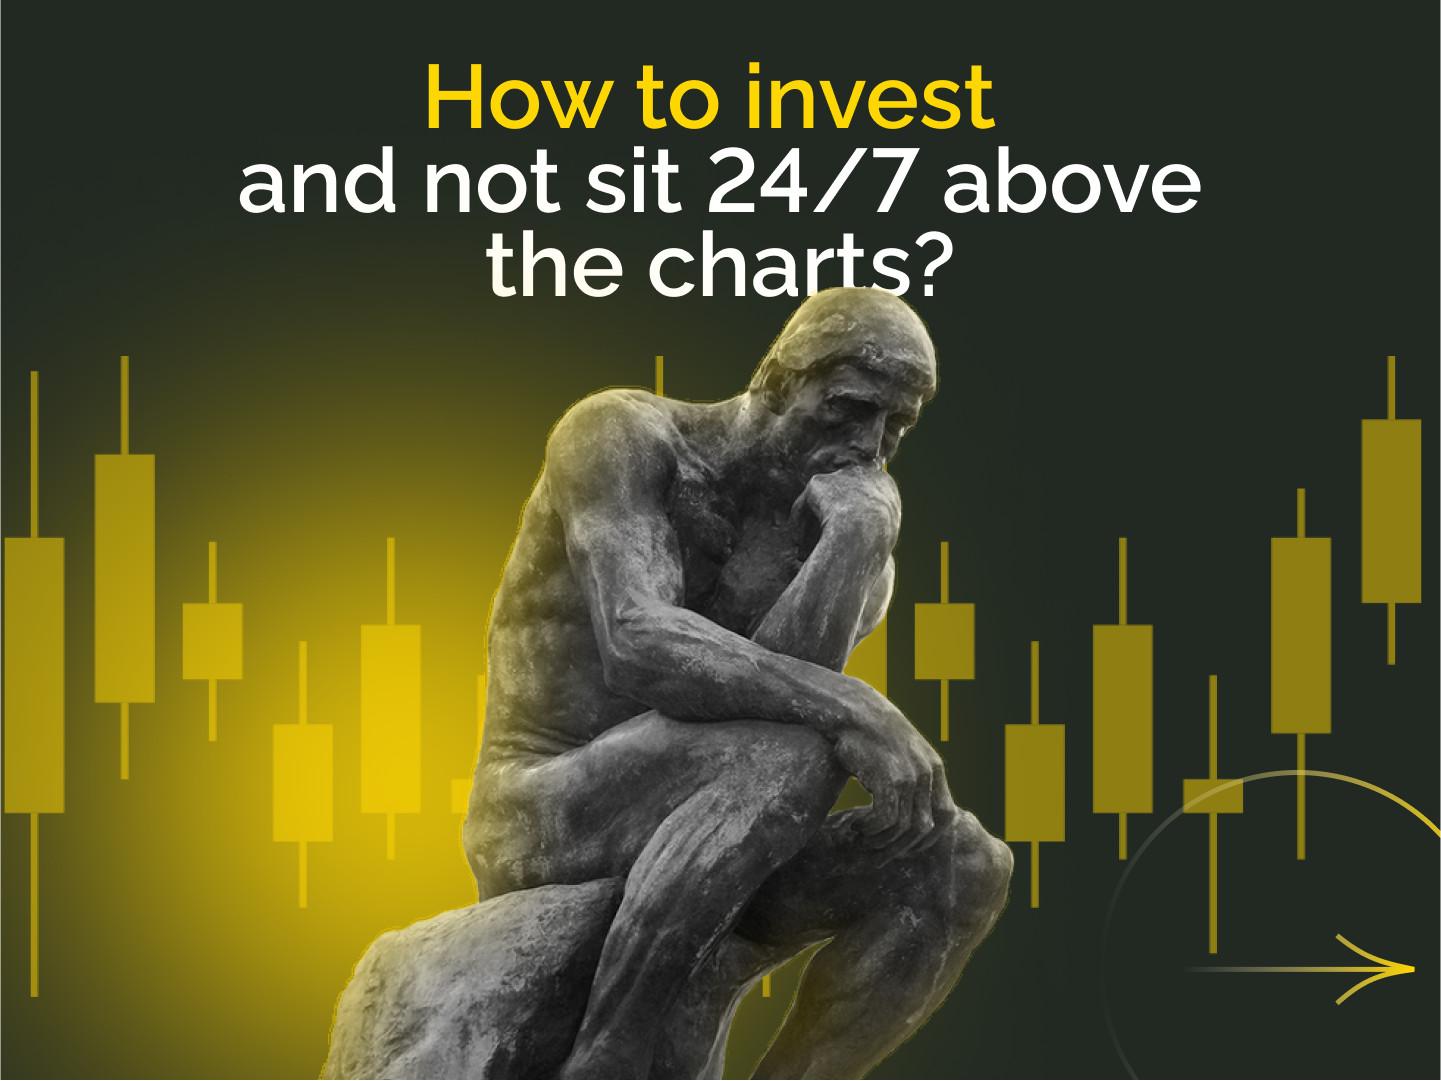 How to invest and not sit 24/7 over charts?